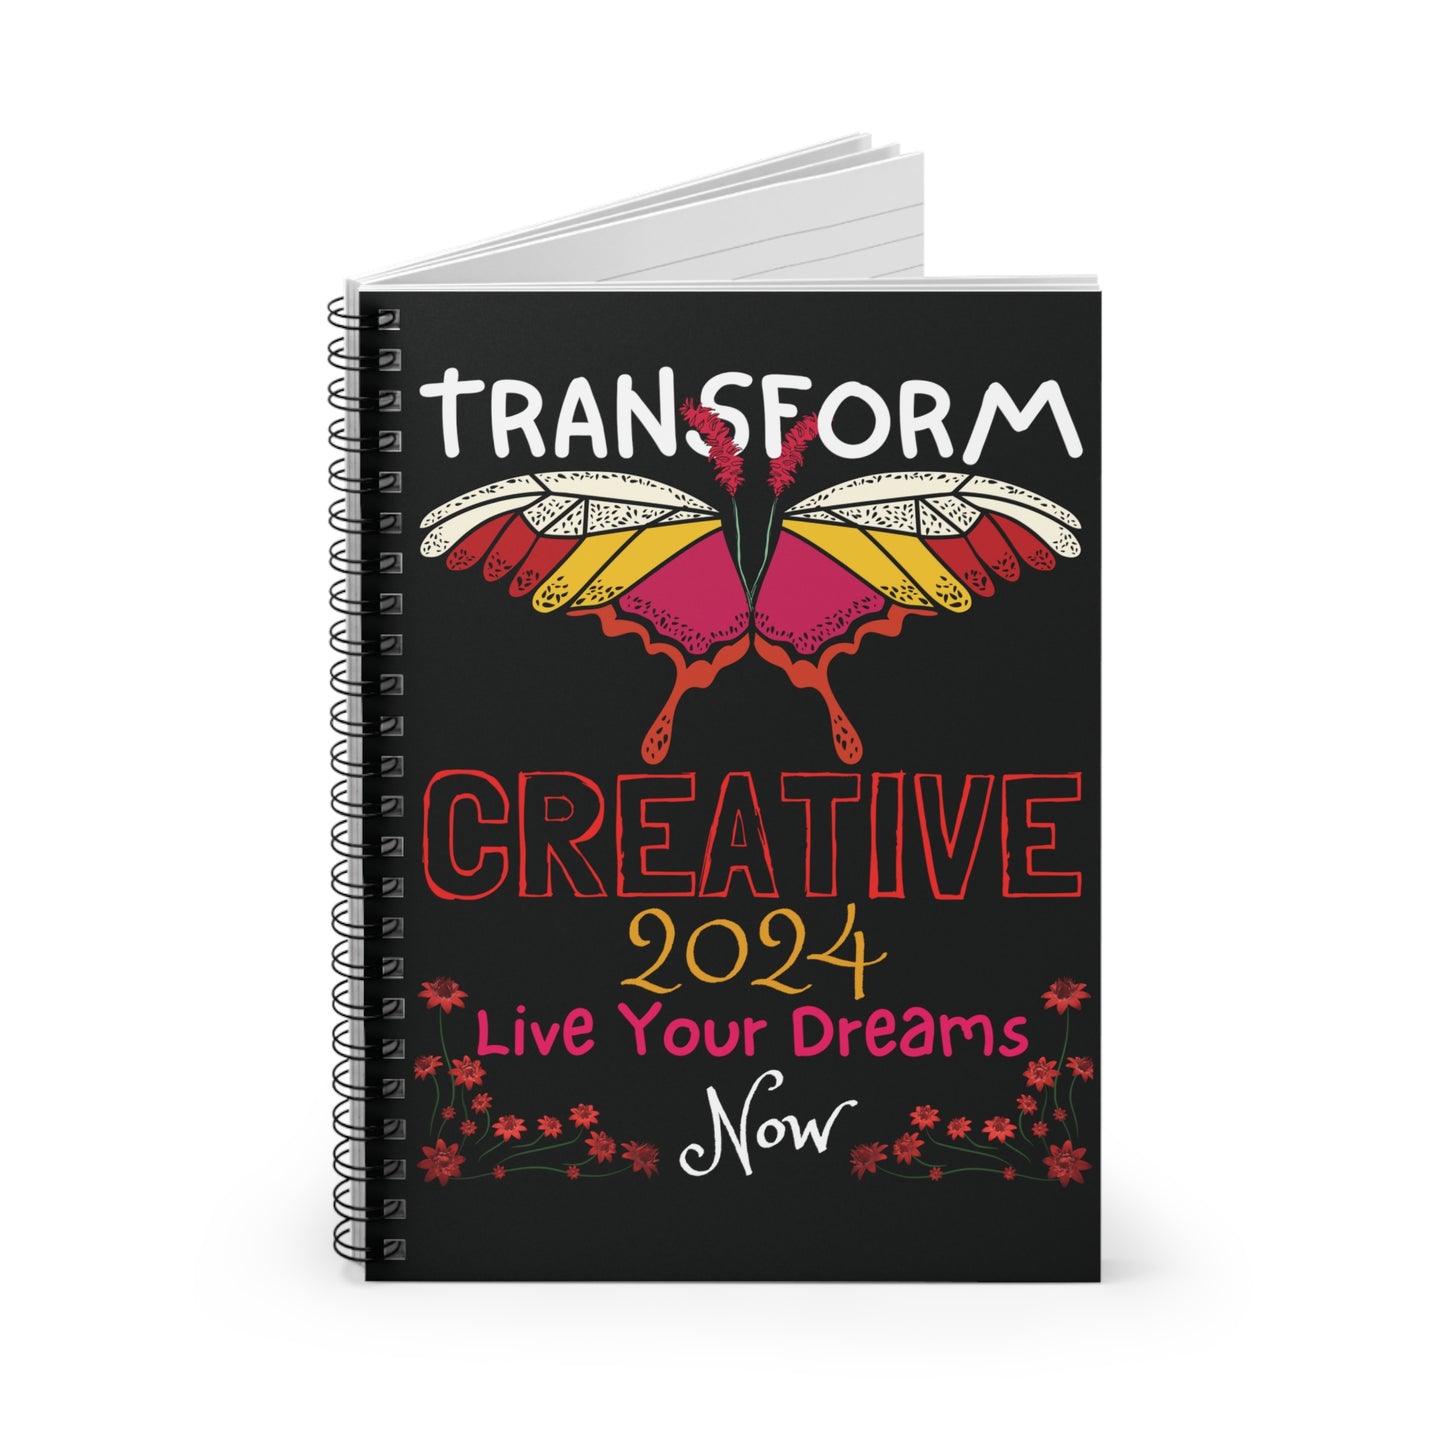 Transform Creative 2024 Now Spiral Notebook - Ruled Line - Perfect Gift For Creatives